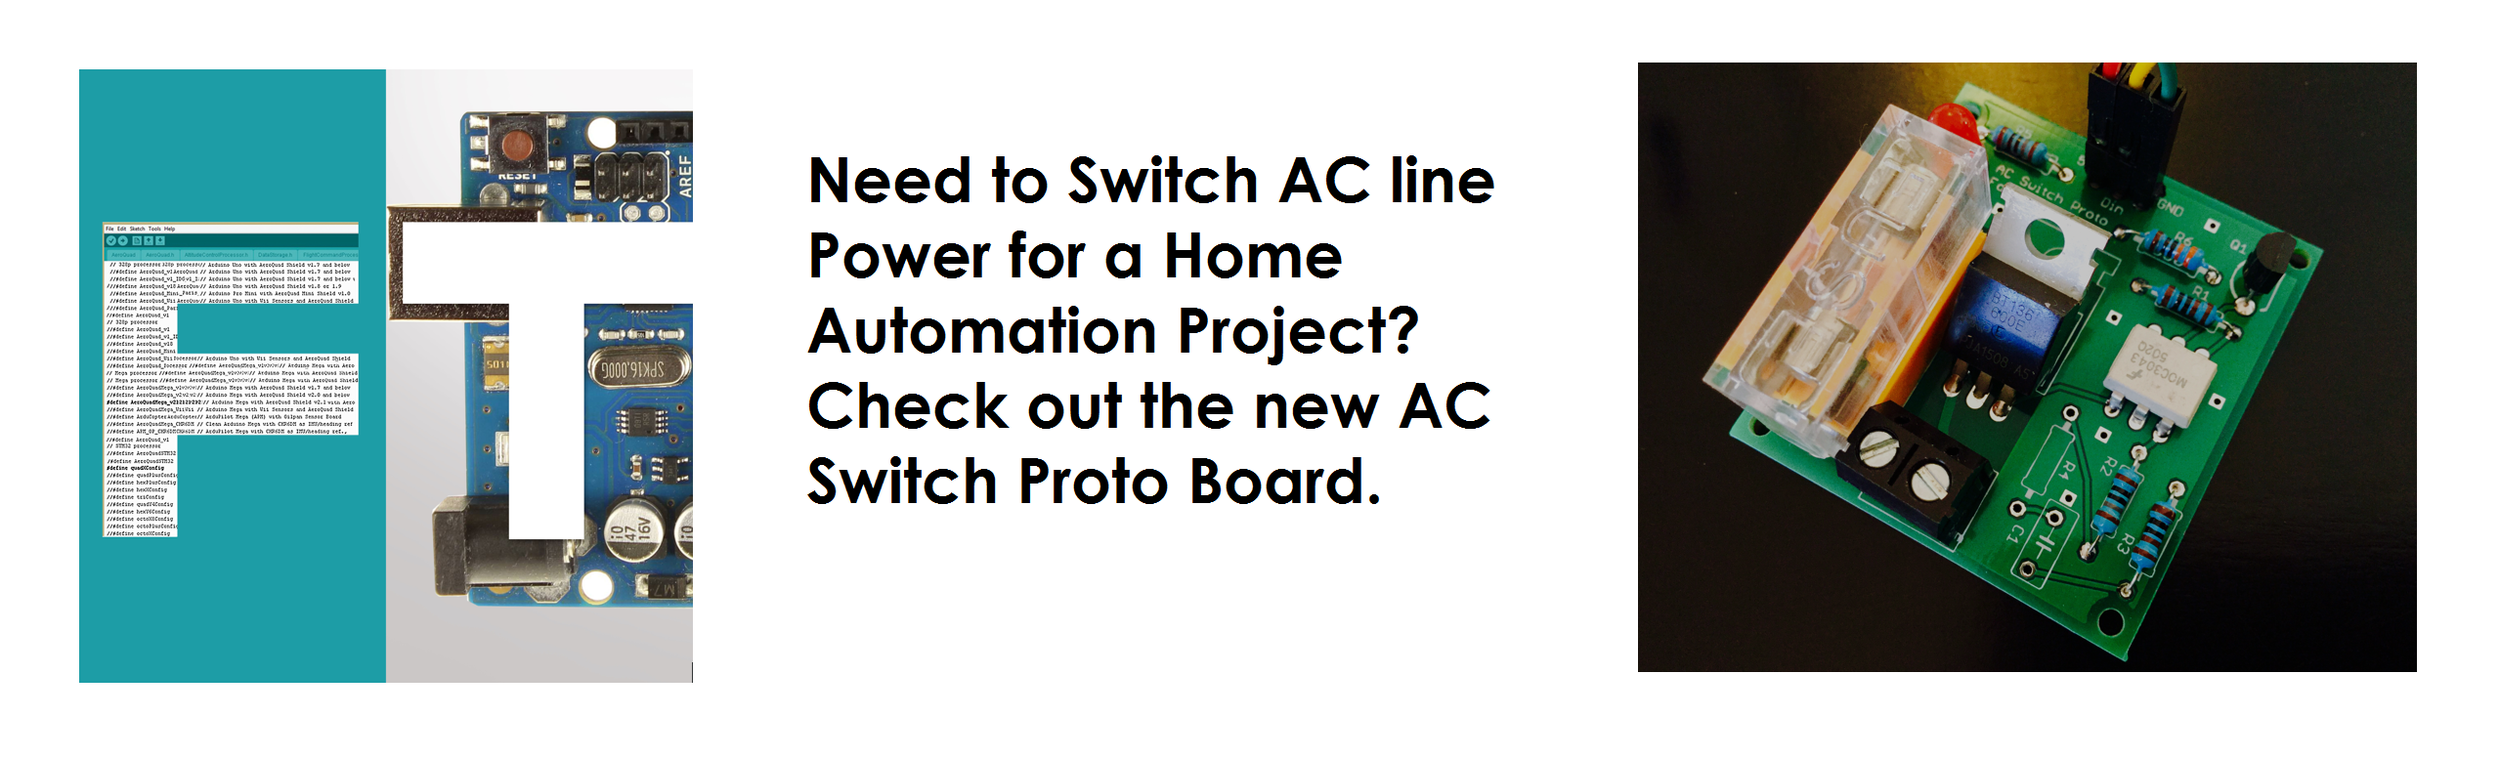 AC Switch Proto Board Banner.png